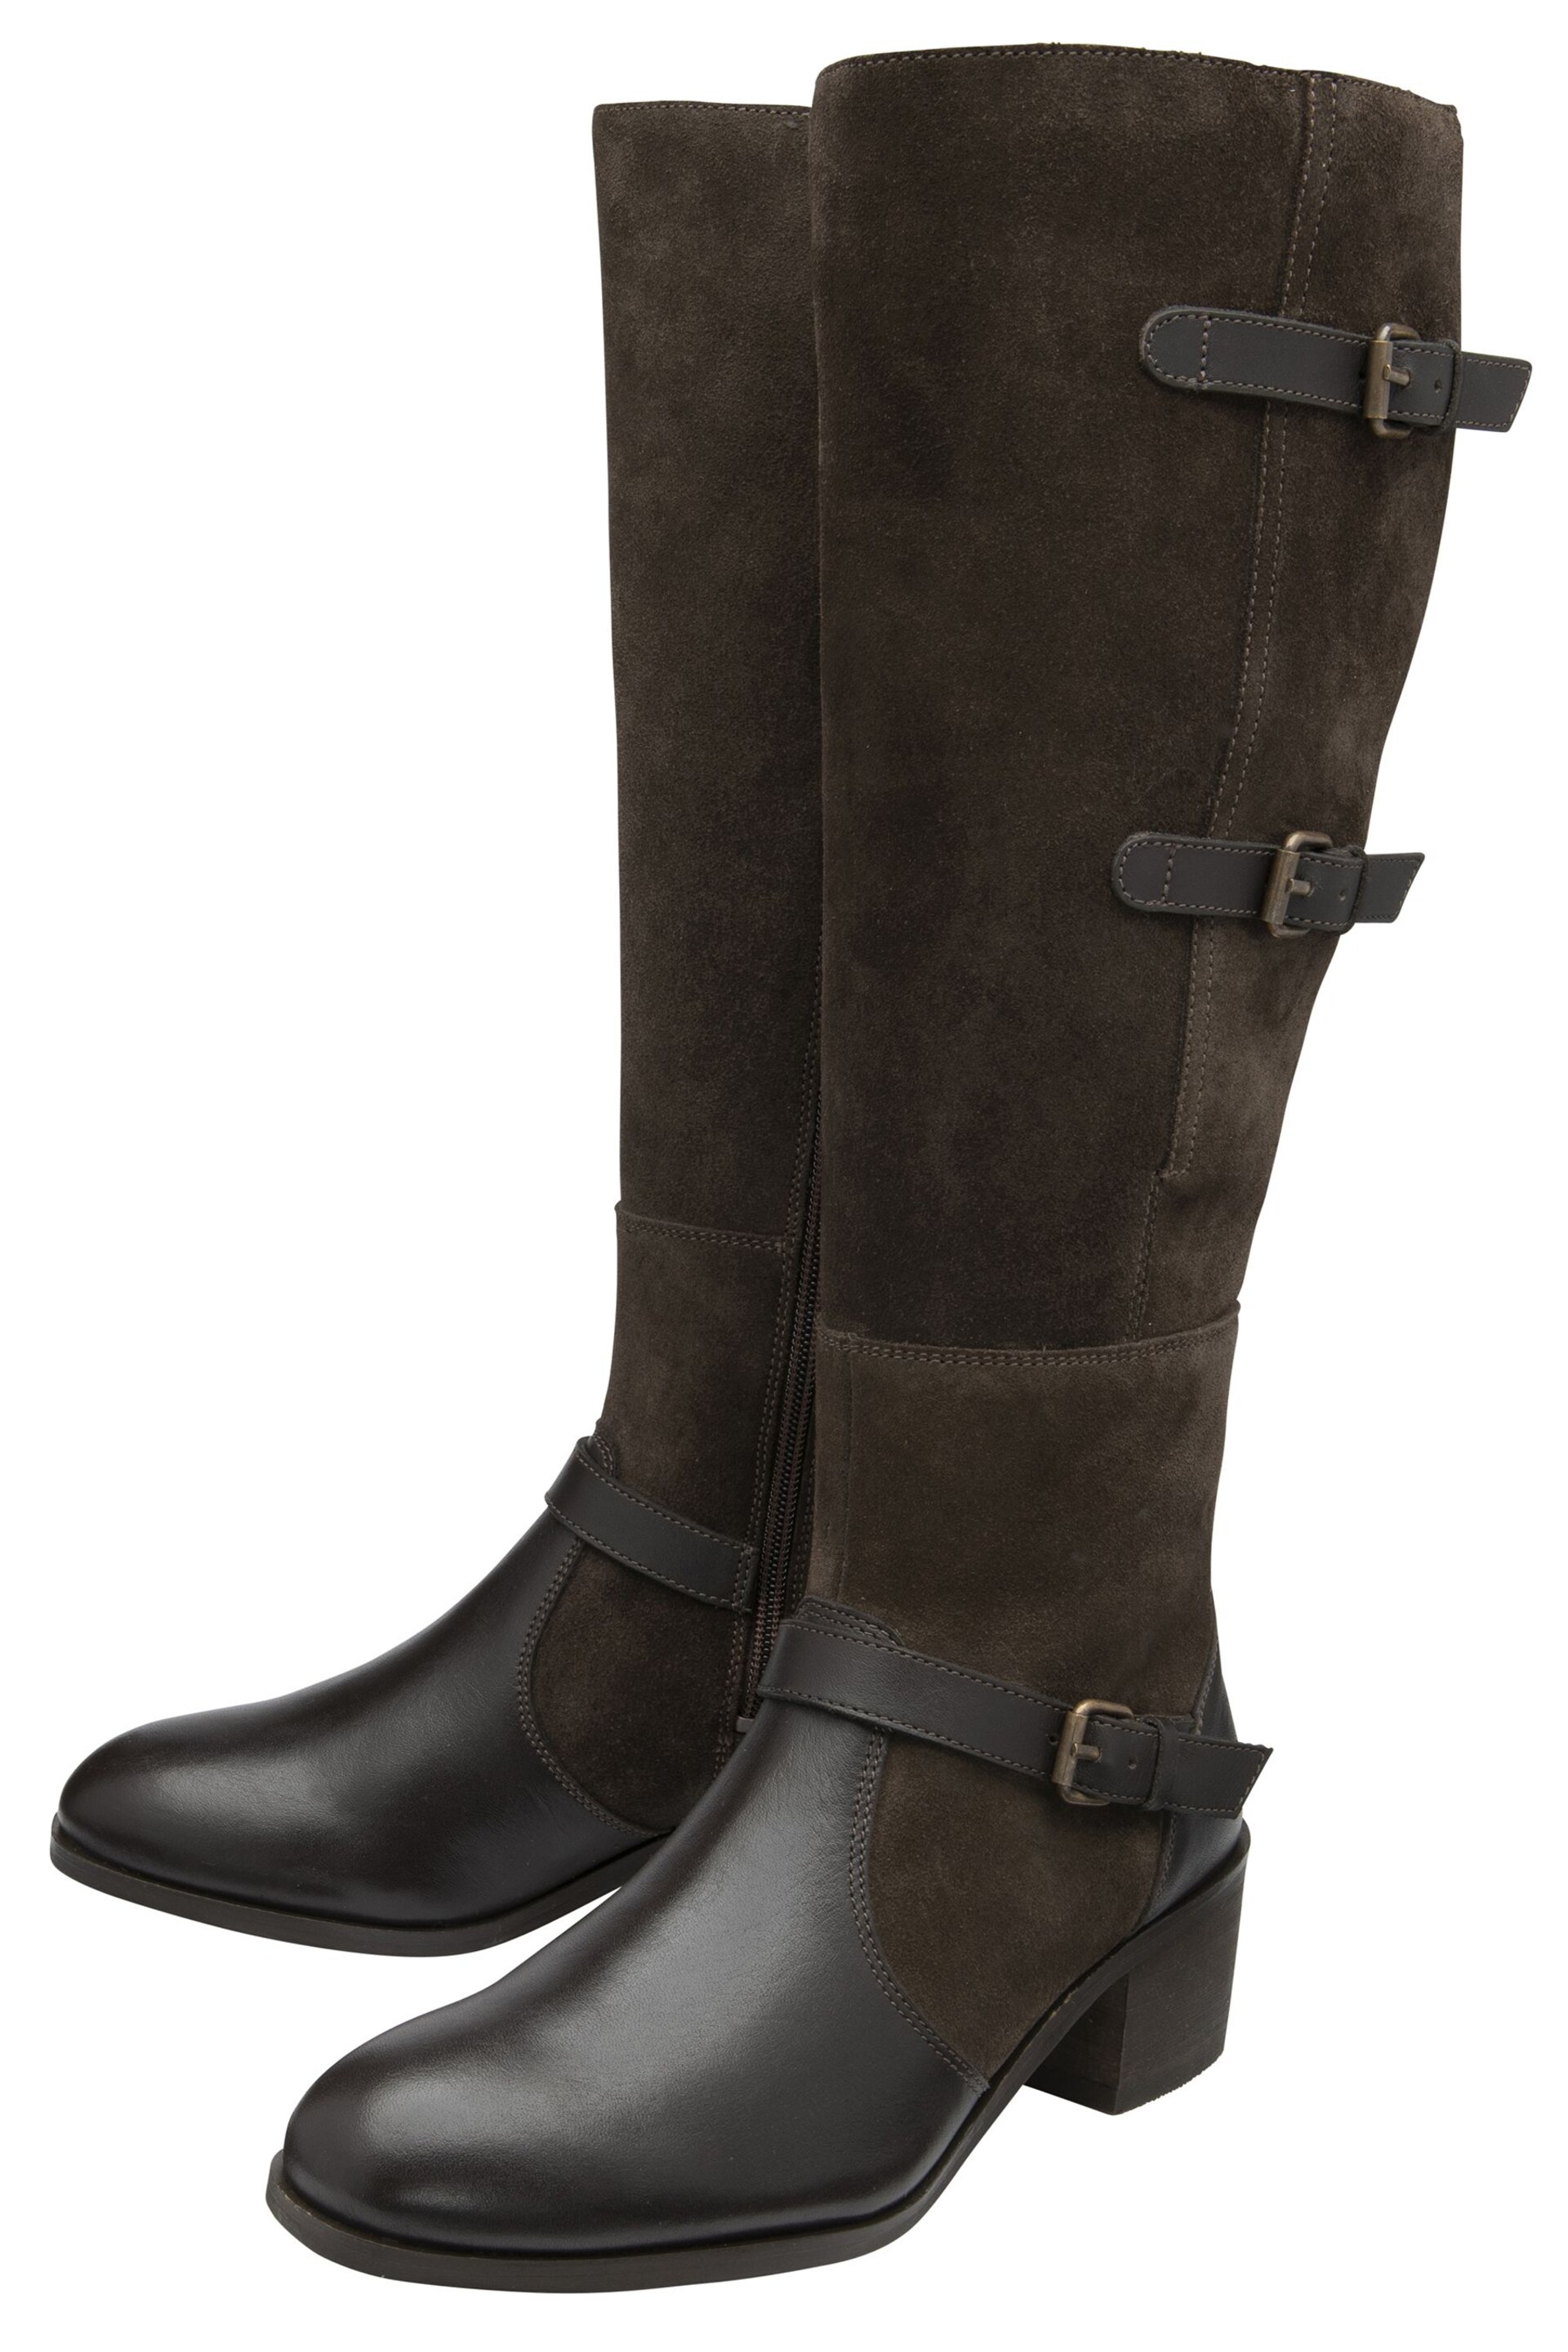 Ravel Brown Leather & Suede Zip-Up Knee High Boots - Image 2 of 4